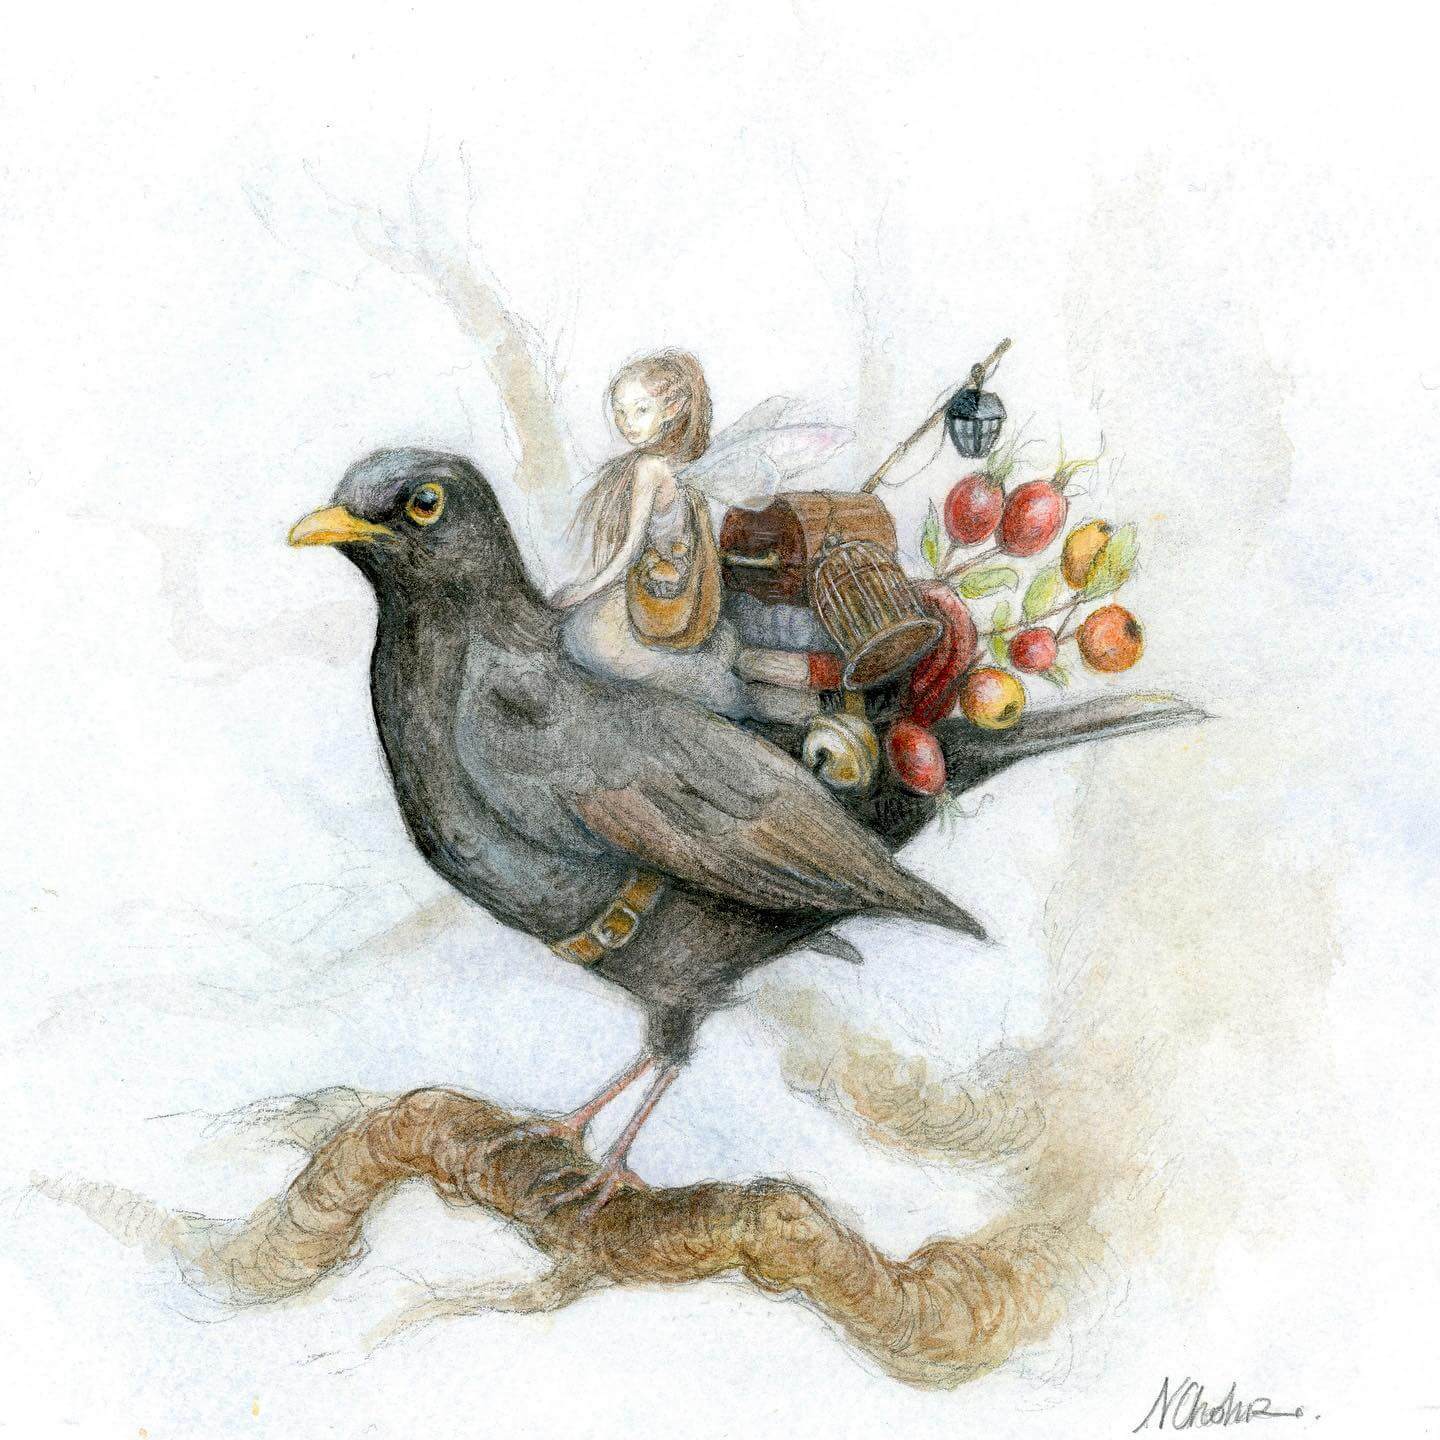 Painting in watercolors by Natacha Chohra representing a small fairy who is travelling on a Blackbird. On the bird's back are also some things, which belong to the fairy: books, a small wooden bucket, a small wooden chest, and some branches with forest fruits.